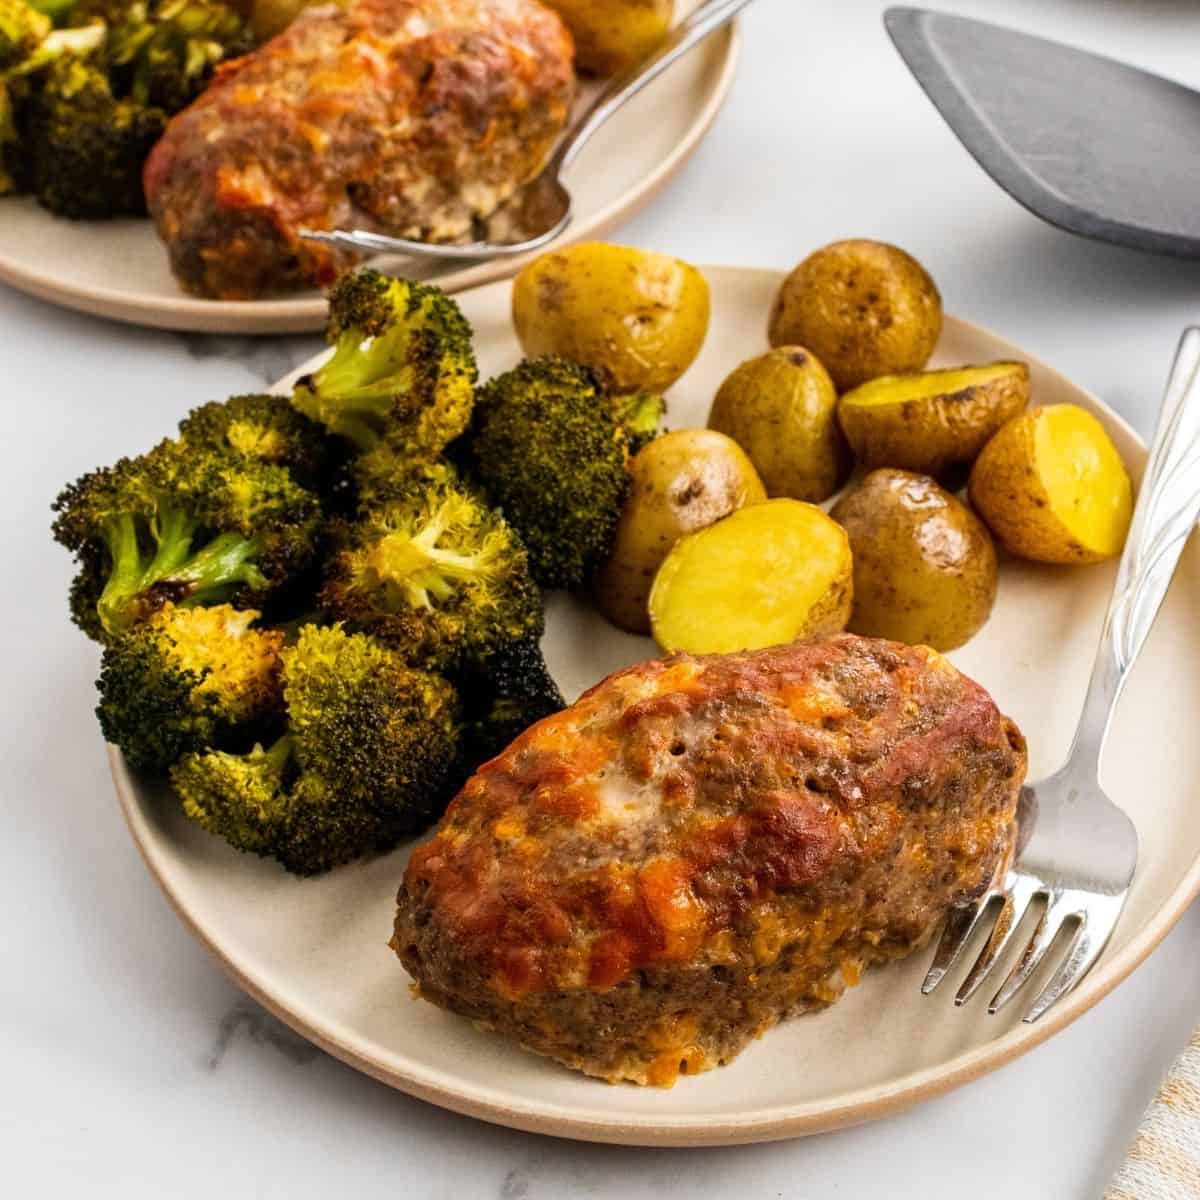 mini meatloaf recipe. One meatloaf portion on a plate with broccoli and potatoes